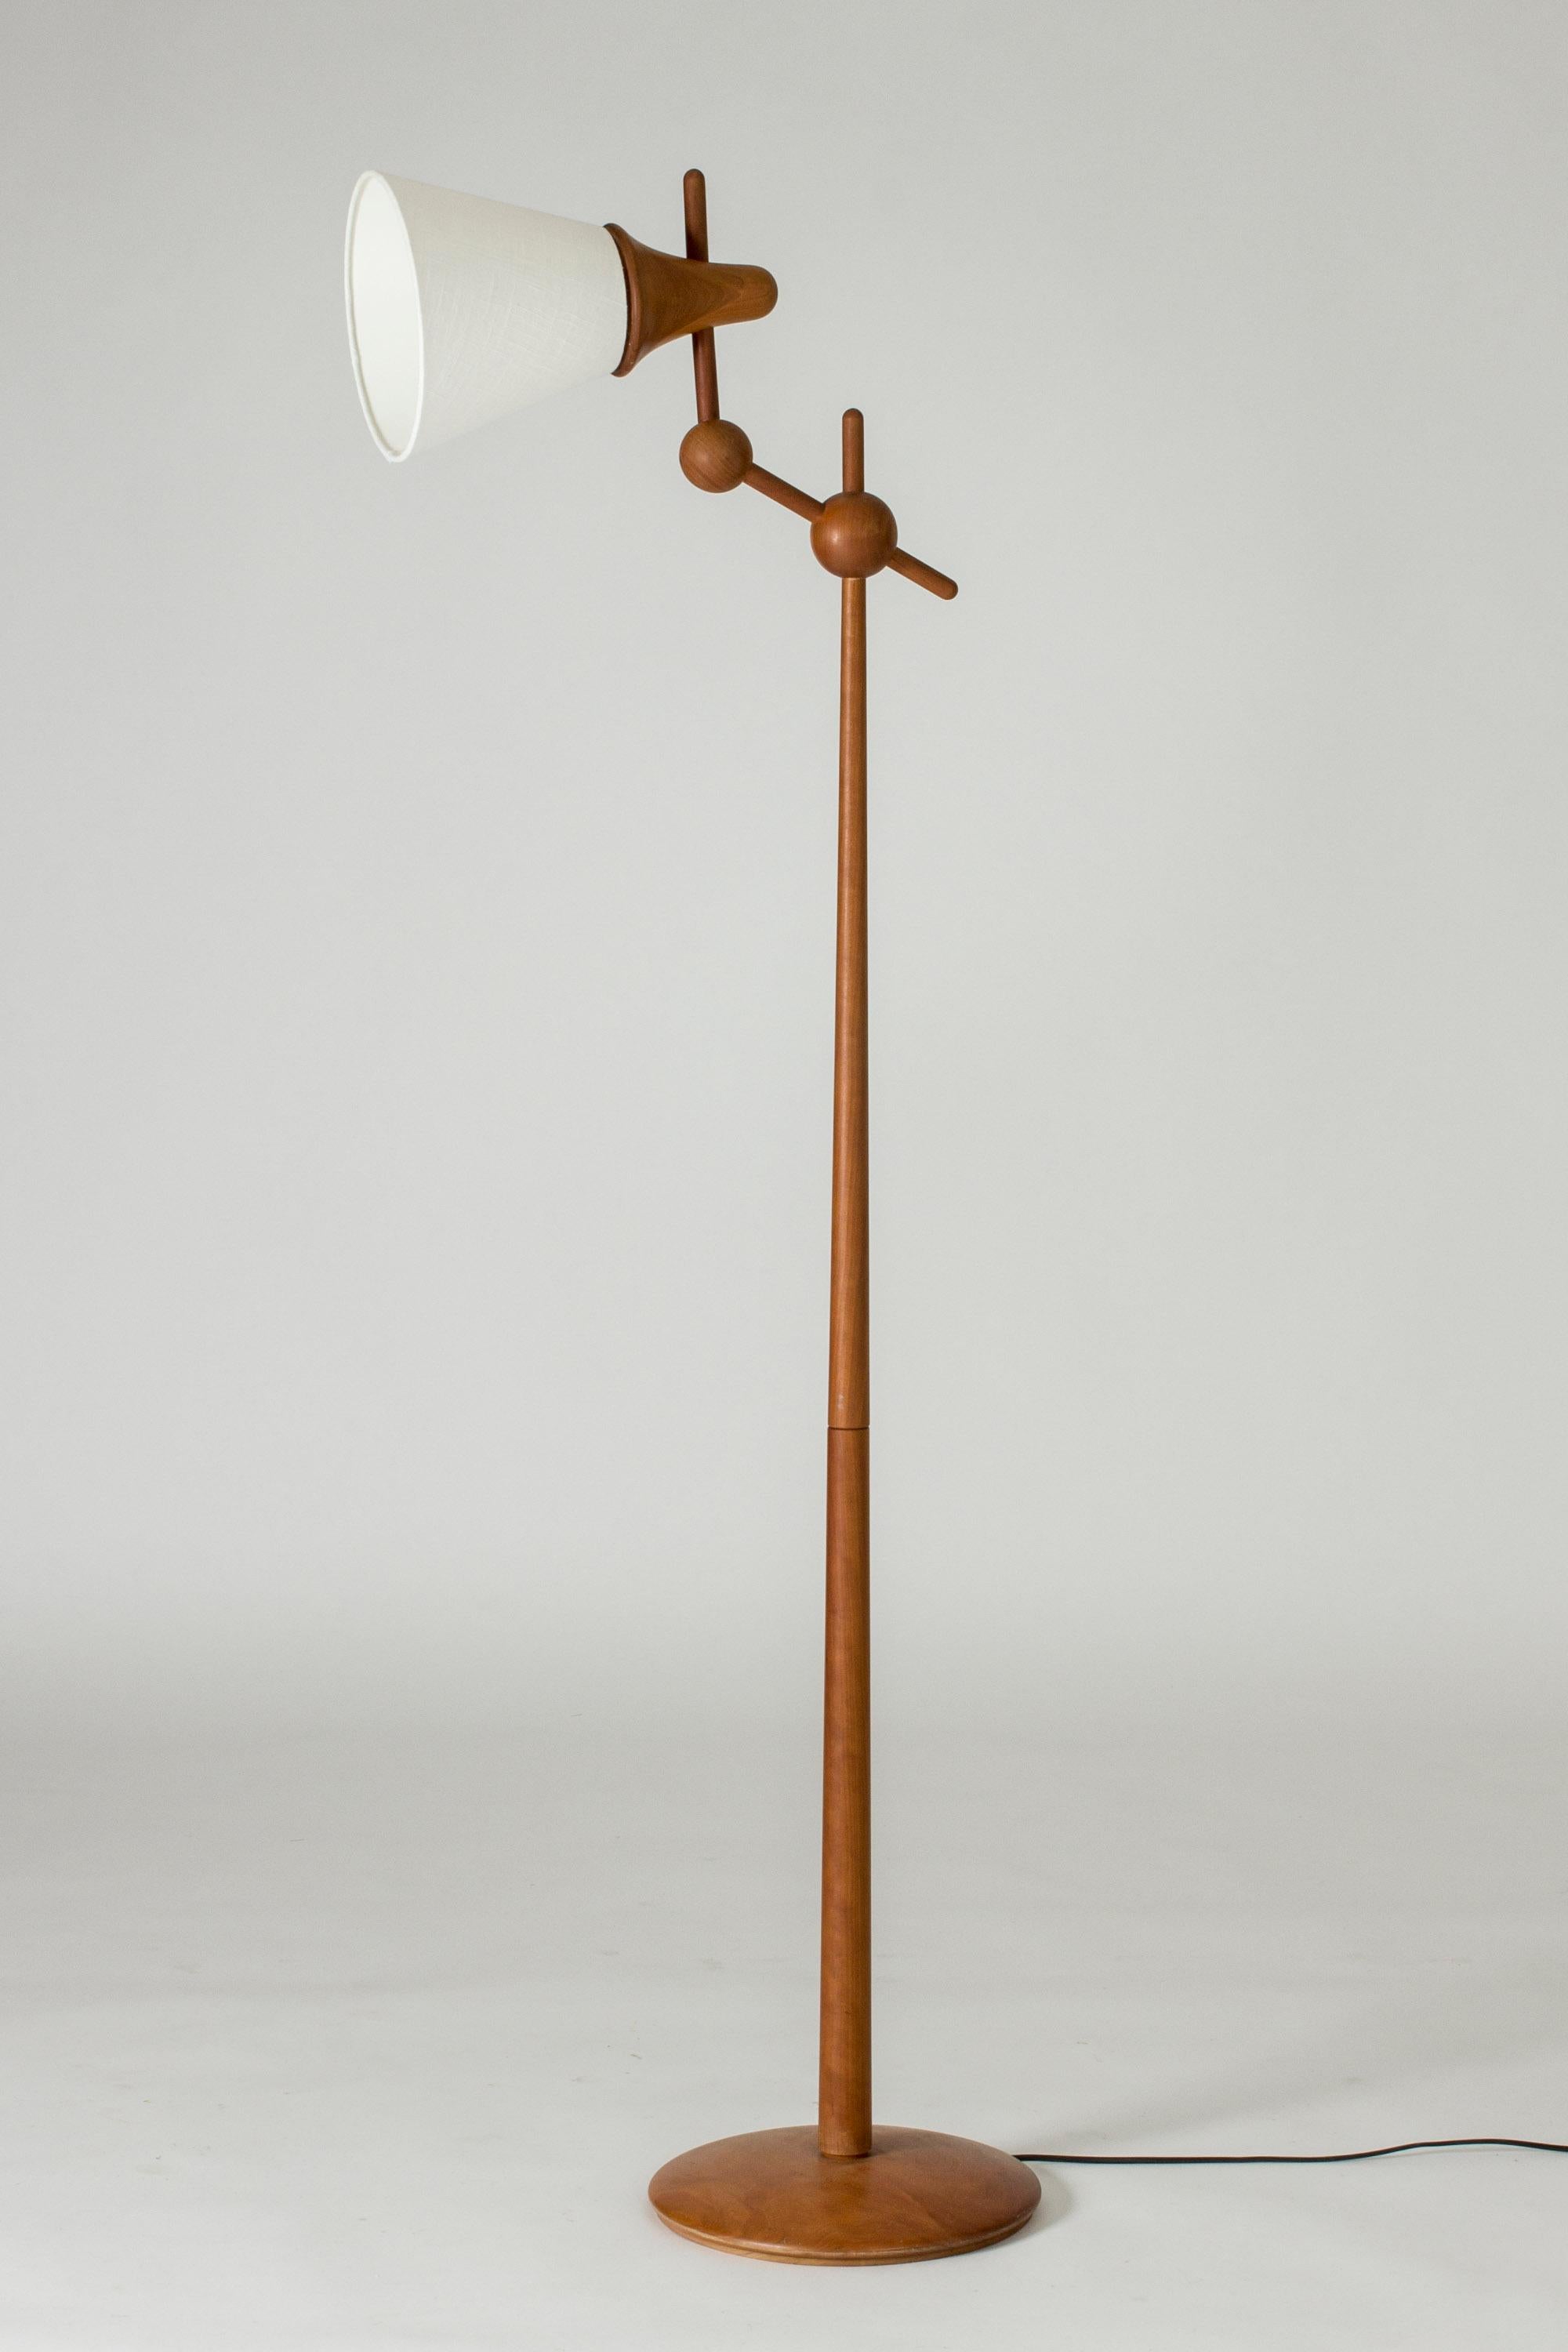 Cool floor lamp from Haslev, made from teak. Chunky, smooth design with round details. The shade can be turned in different angles.